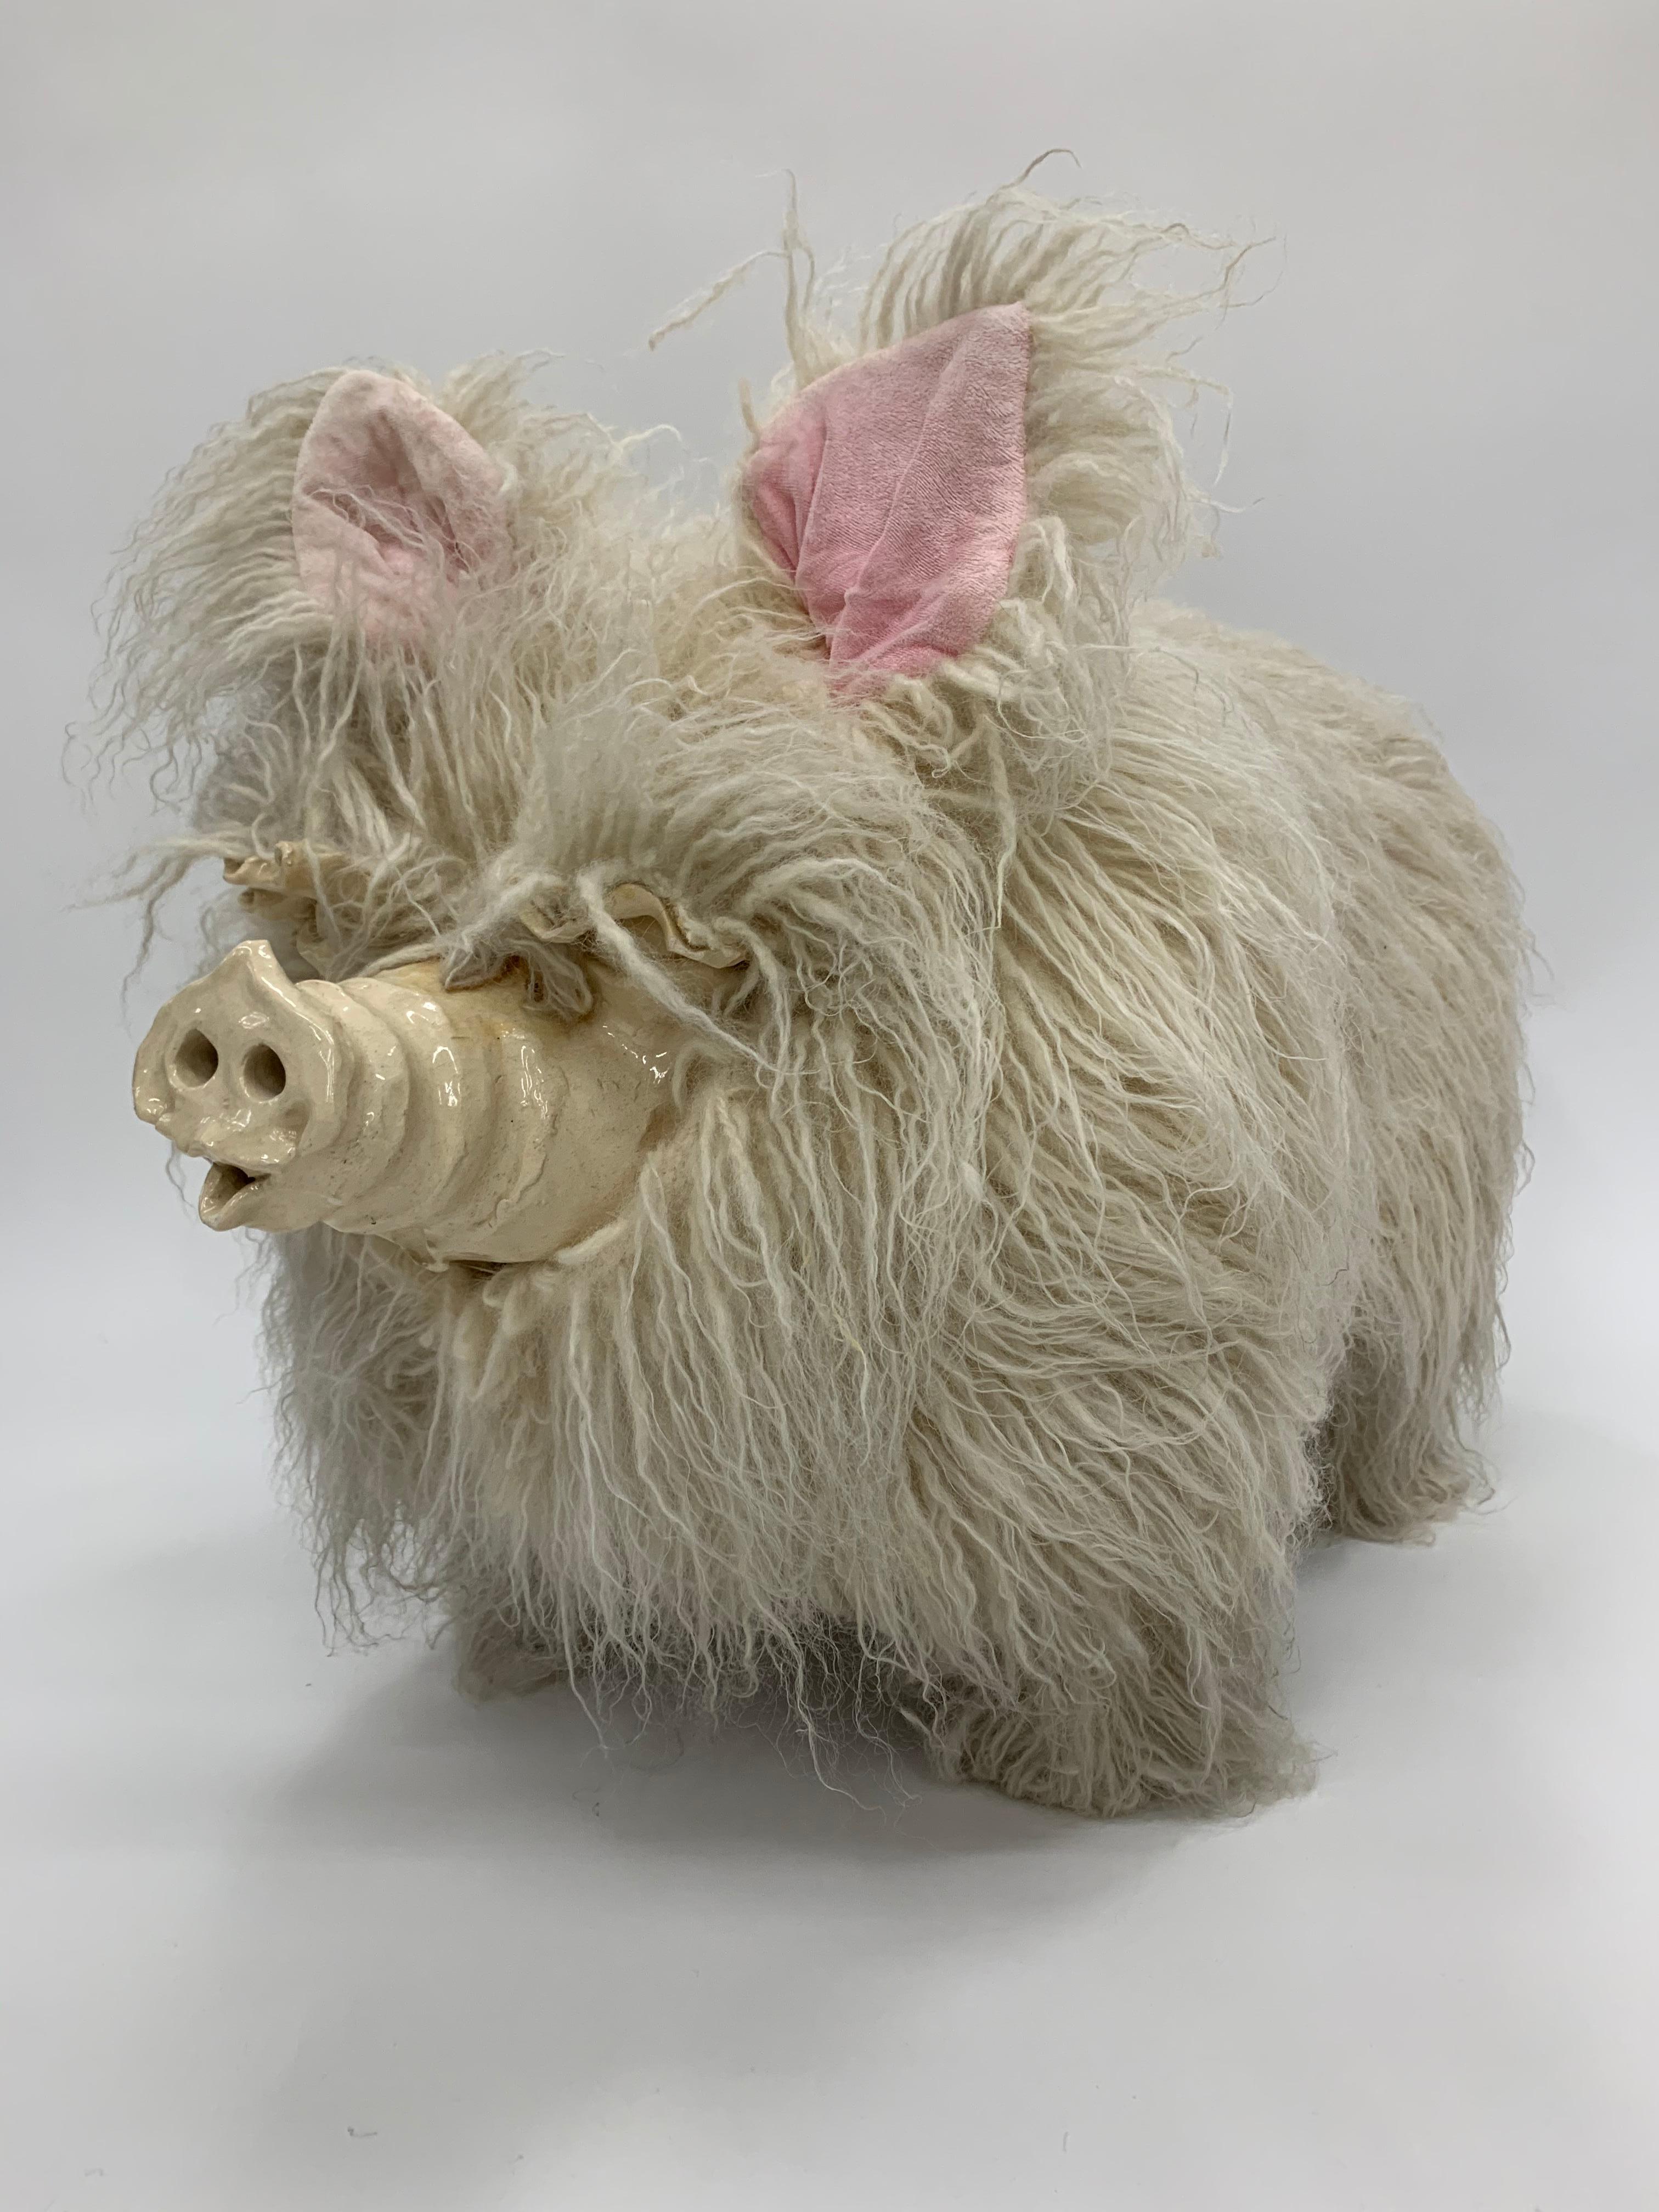 Modern Sculptural Edna Cataldo Pig Flokati Wool Foot Stool, Signed and Dated 1995